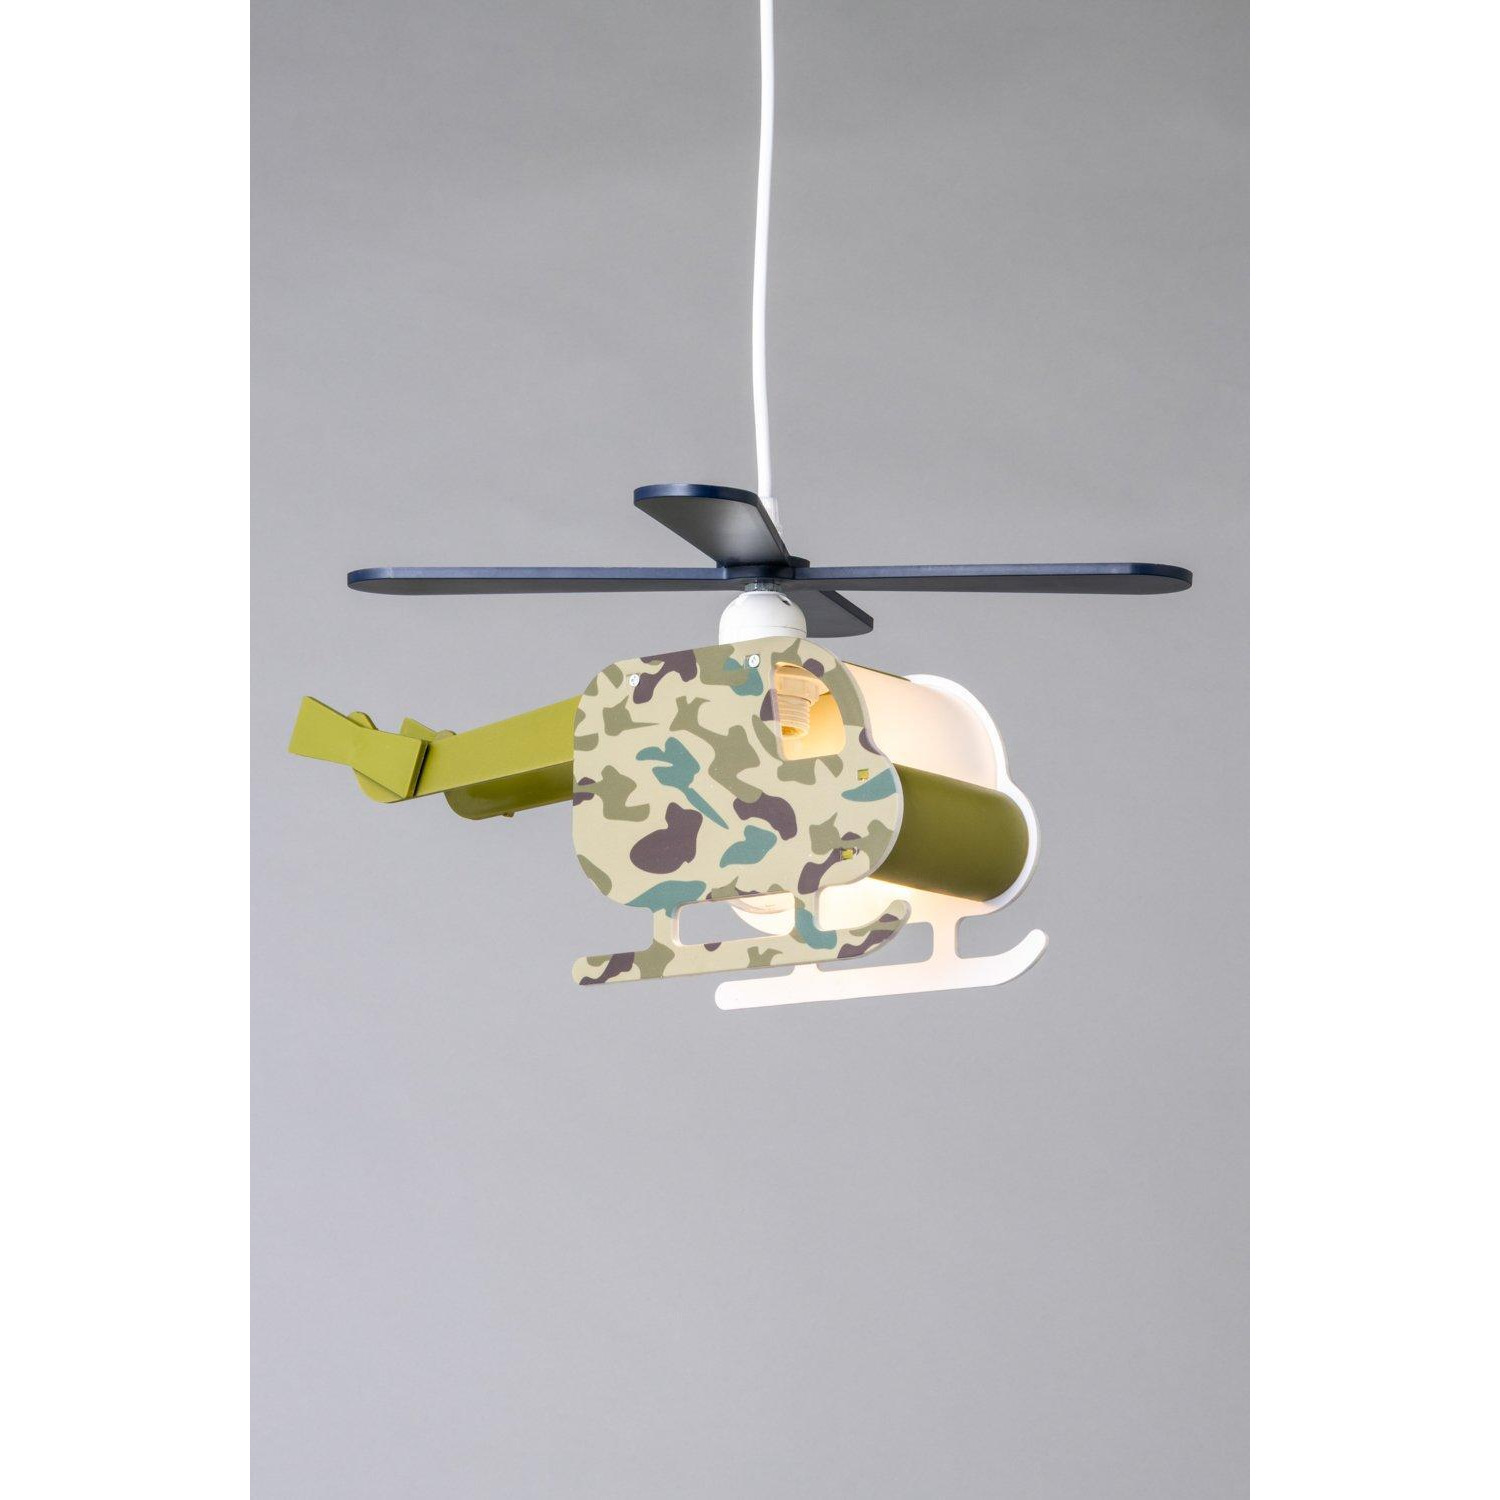 Glow Helicopter Ceiling Pendant Light - image 1